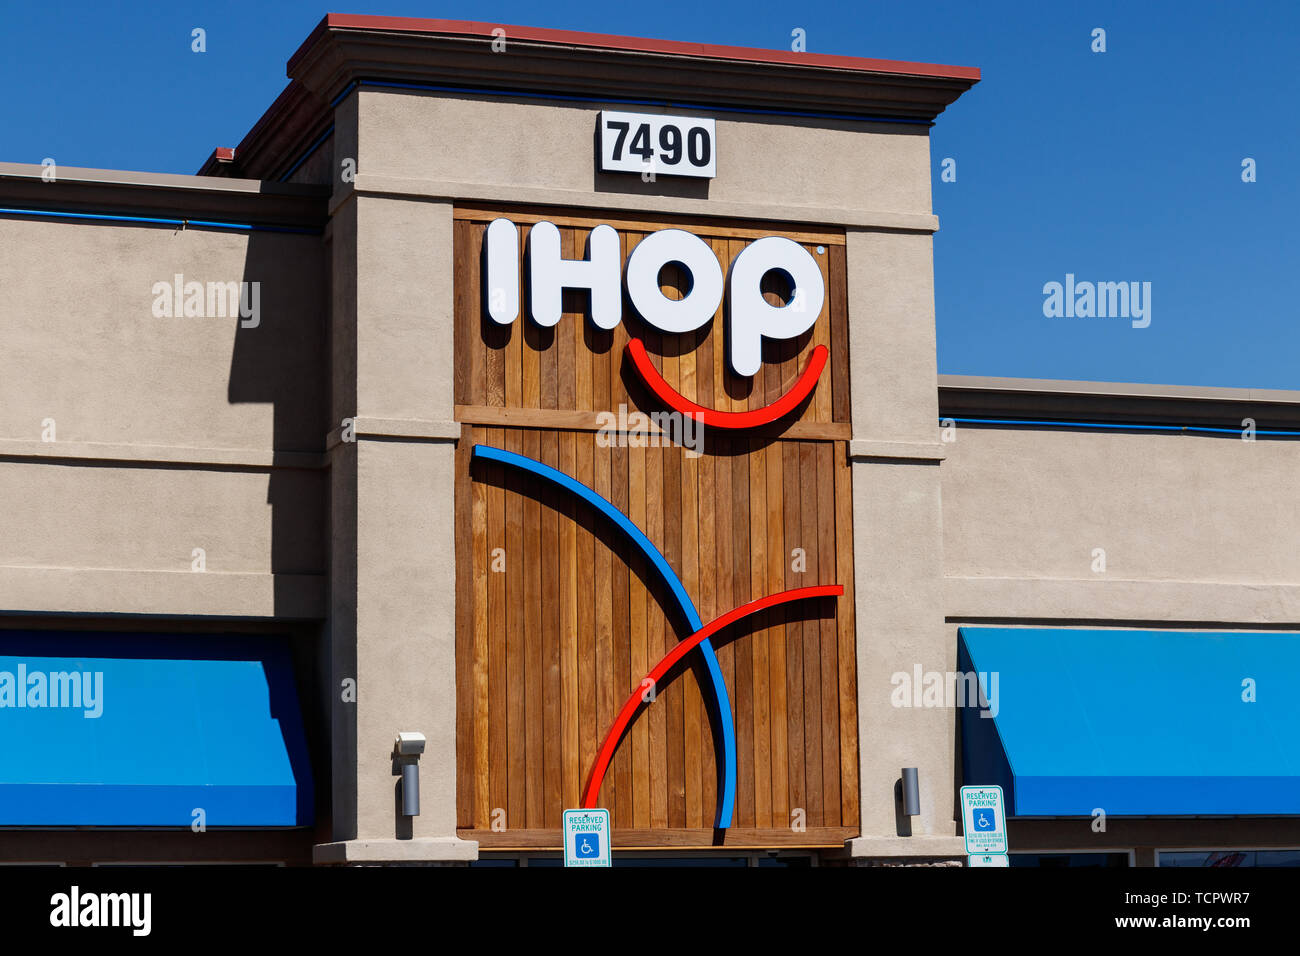 Las Vegas, Nevada, USA. 11th June, 2018. The sign for an IHOP restaurant is  seen in Las Vegas. The International House of Pancakes created a marketing  campaign suggesting it was going to